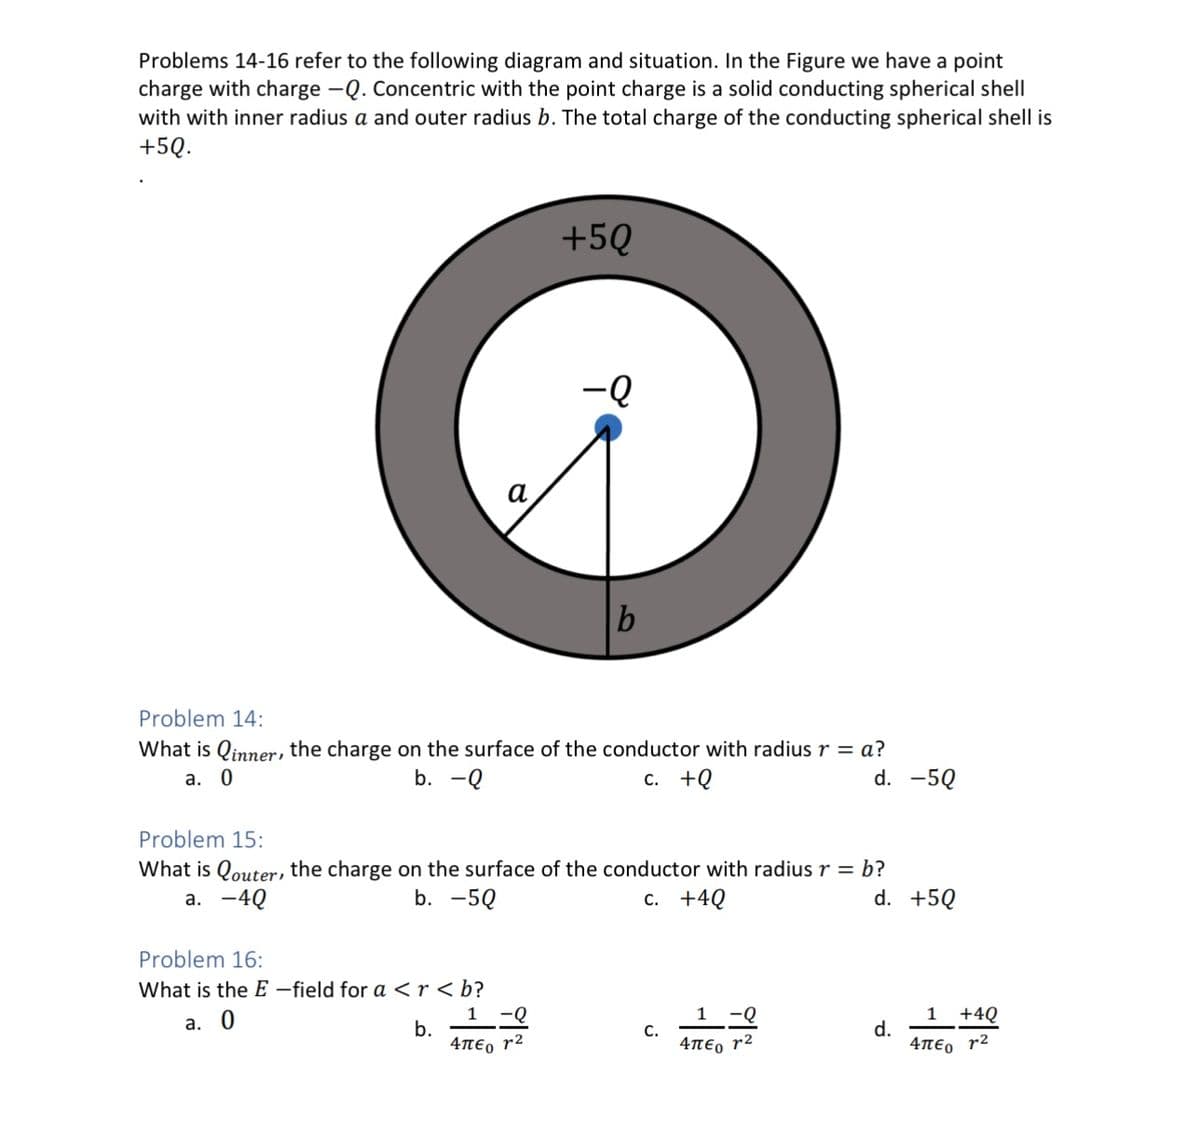 Problems 14-16 refer to the following diagram and situation. In the Figure we have a point
charge with charge -Q. Concentric with the point charge is a solid conducting spherical shell
with with inner radius a and outer radius b. The total charge of the conducting spherical shell is
+5Q.
+5Q
Problem 16:
What is the E-field for a <r<b?
a. 0
b.
-Q
Problem 14:
What is Qinner, the charge on the surface of the conductor with radius r = a?
a. 0
b. -Q
c. +Q
d. -5Q
1
-Q
4περ 12
b
Problem 15:
What is Qouter, the charge on the surface of the conductor with radius r = b?
a. -4Q
b. -5Q
c. +4Q
d. +5Q
C.
1
-Q
Απεο 72
d.
+4Q
1
Απεο 72